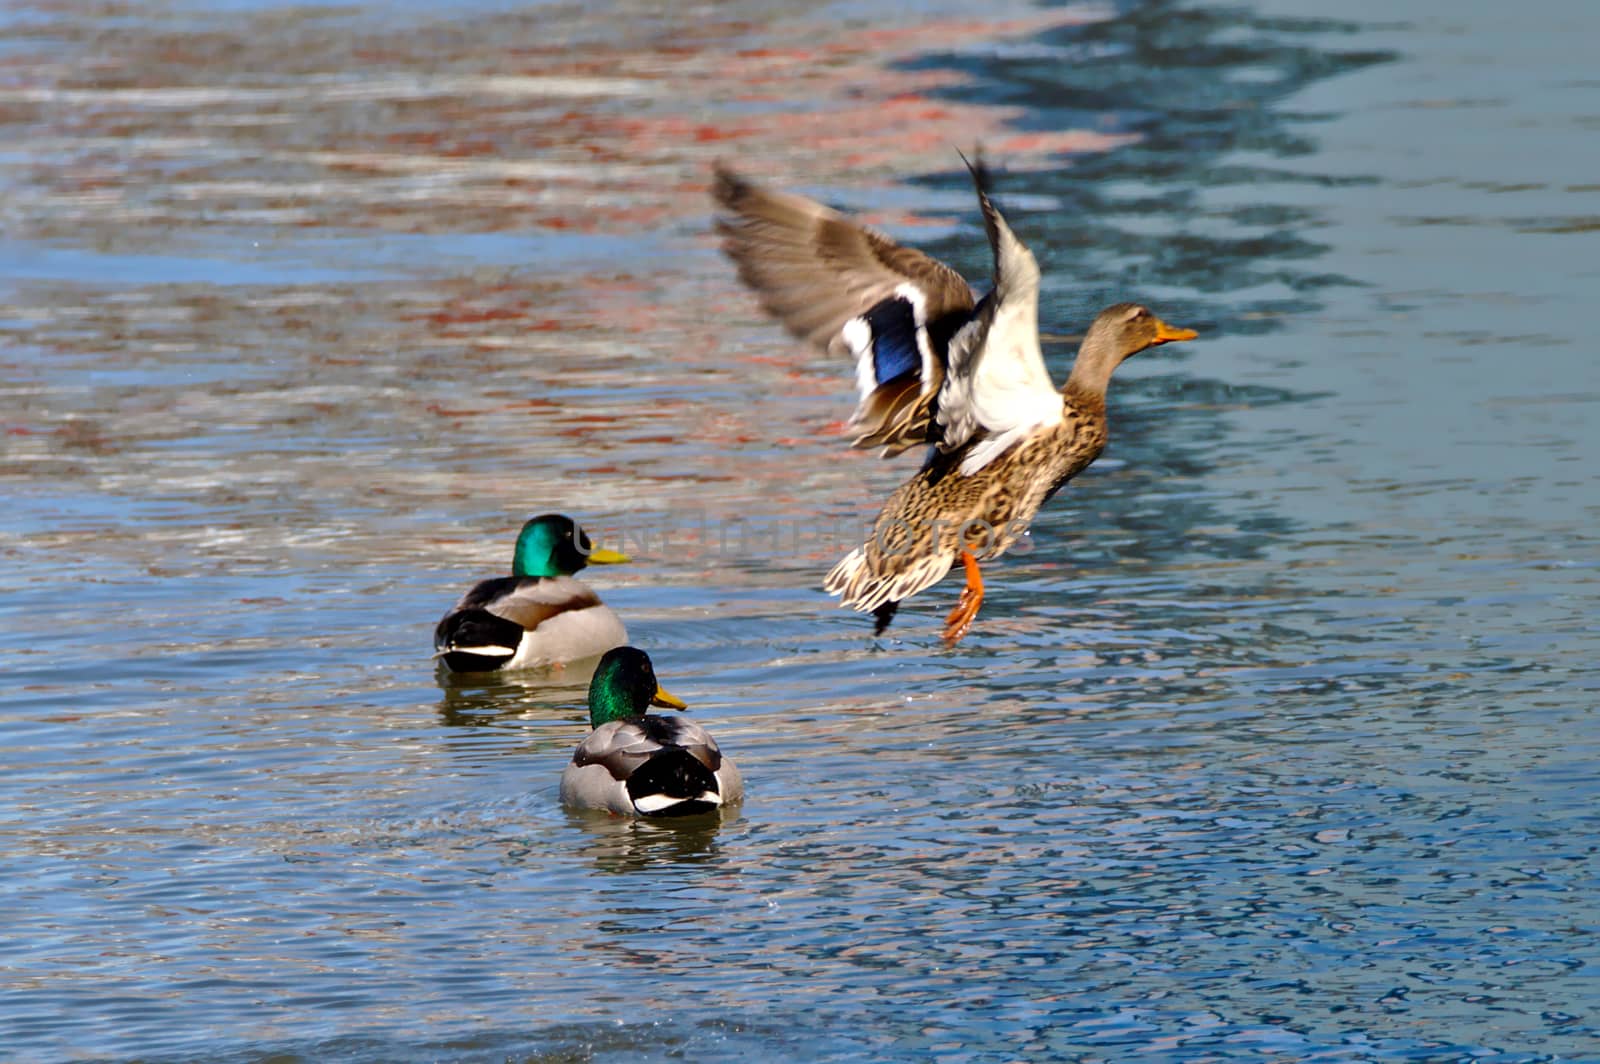 Female duck flying away, two males stay behind.